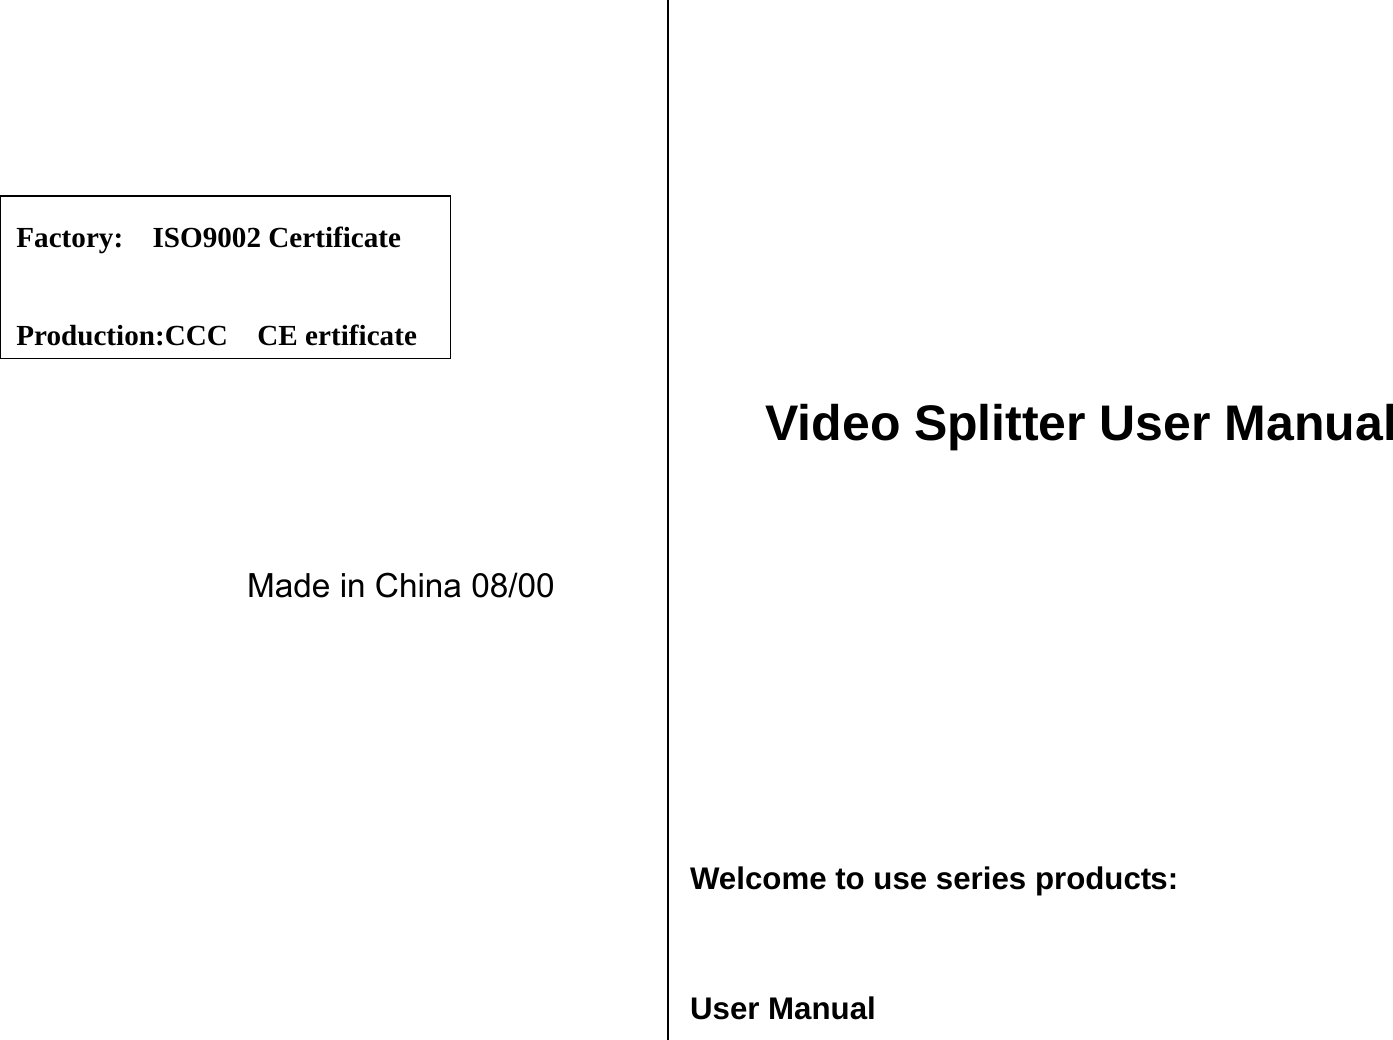                  Made in China 08/00                 Video Splitter User Manual       Welcome to use series products:  User Manual Factory:  ISO9002 Certificate  Production:CCC  CE ertificate